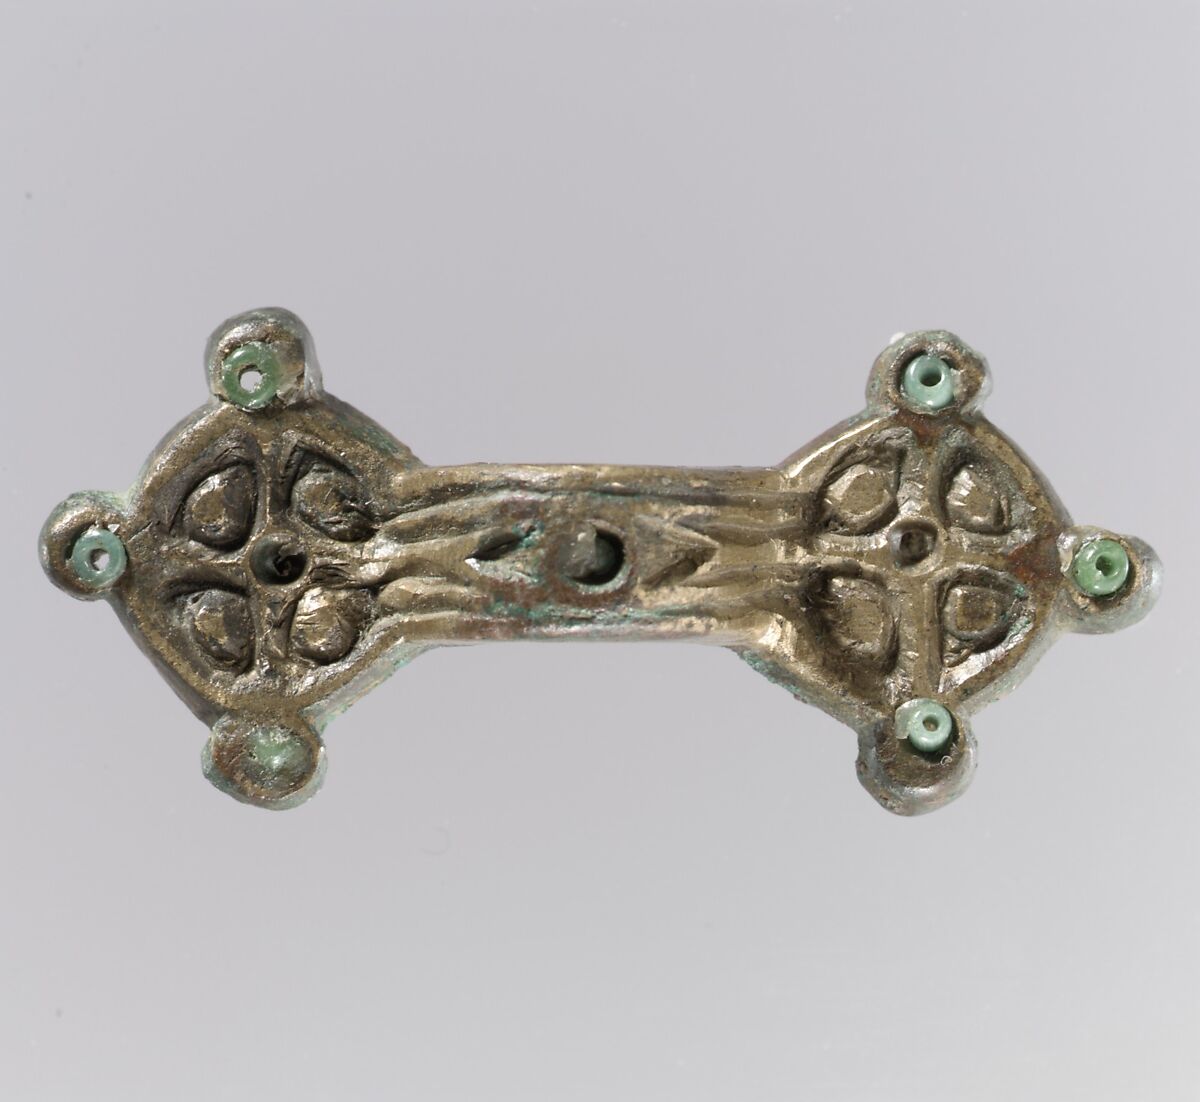 Equal-Arm Brooch, Copper alloy, glass beads, wax, Frankish 